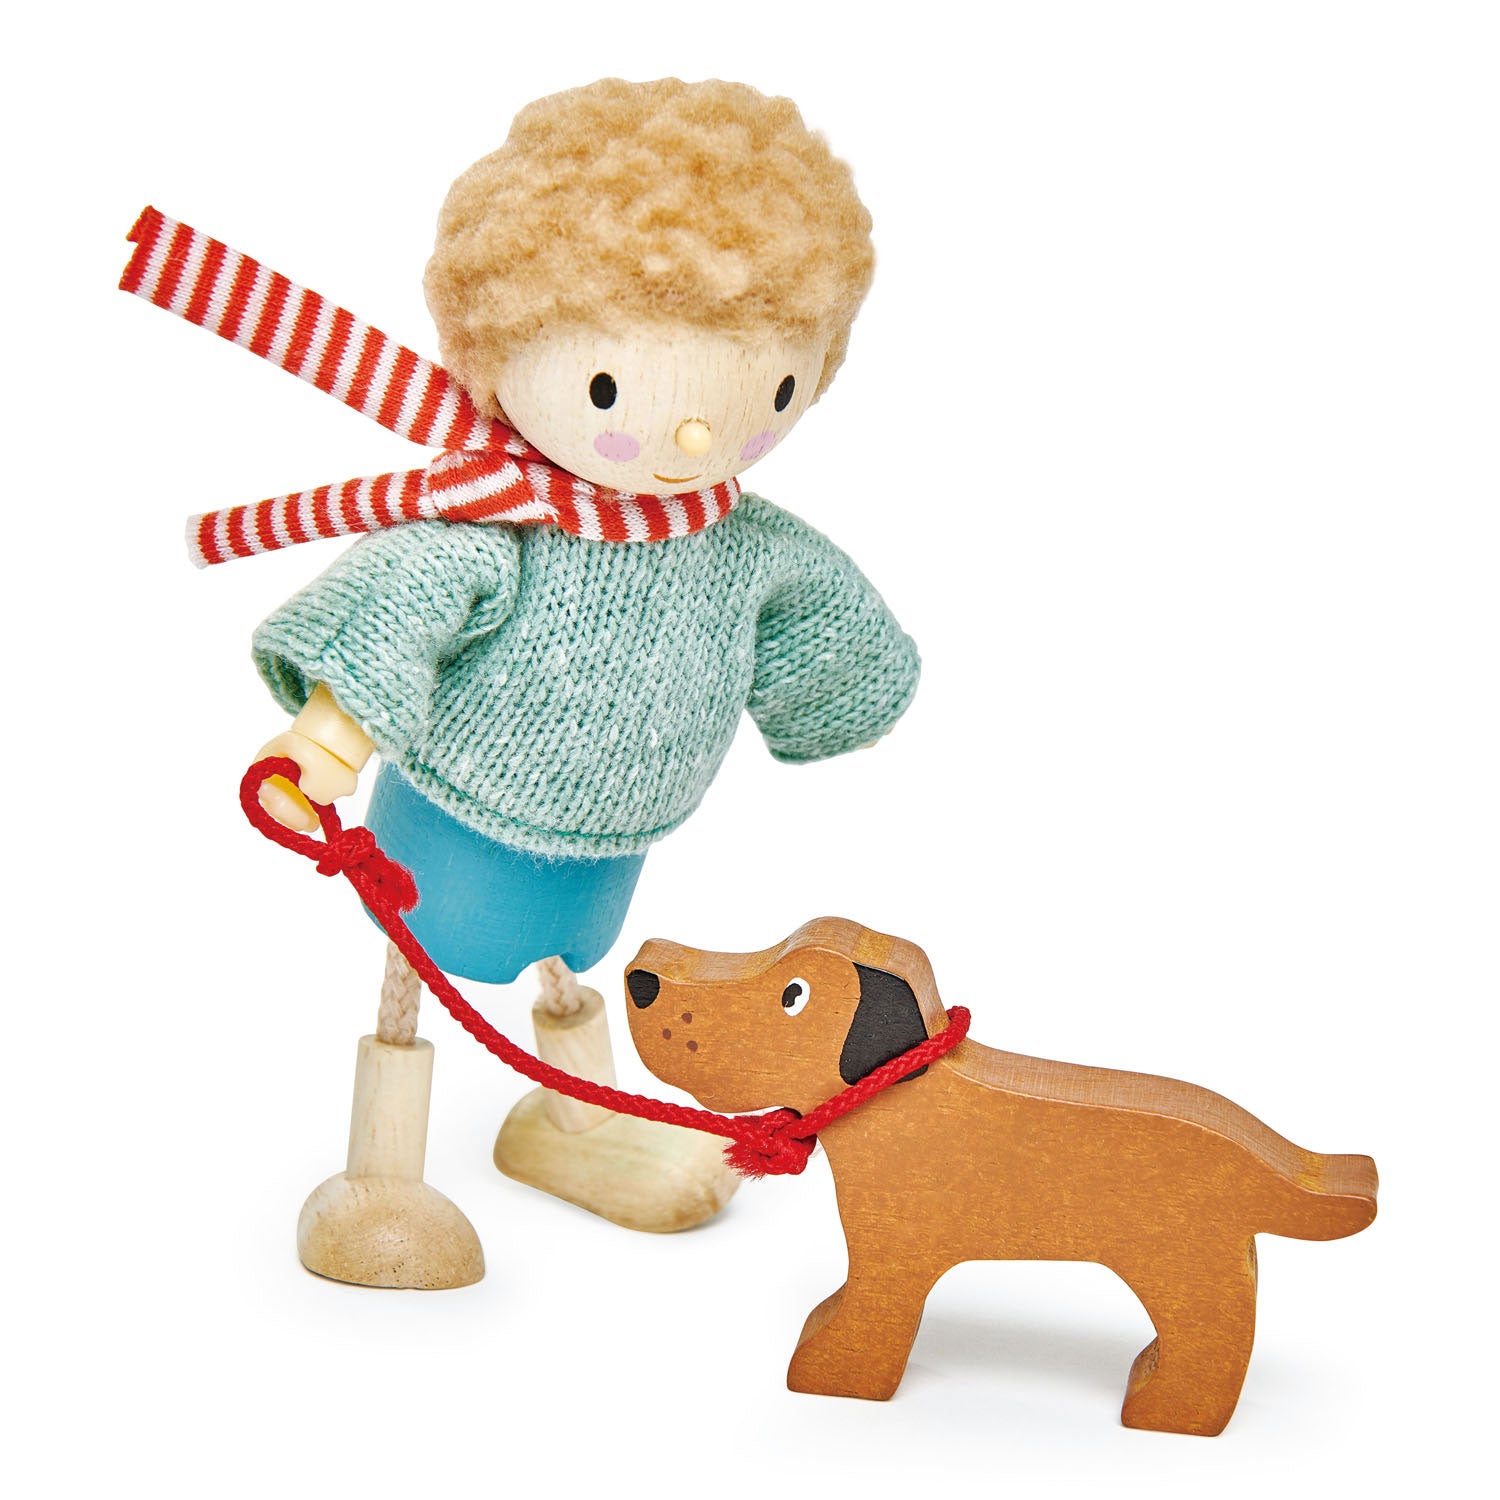 <p>Meet Mr Goodwood out walking with his trusty pet dog. Made from solid wood with beautiful quality knitted and jersey fabrics.</p>
<p>Age range: 3 Years And Older  </p>
<p> Product size: 3.54 x 1.57 x 5.31”  </p>
<p> Weight: 0.11 lbs</p>
<p><strong>Related Products</strong><a href="https://kids.allwomenstalk.com/products/mrs-goodwood-and-the-baby">Mrs Goodwood and the Baby</a><a href="https://kids.allwomenstalk.com/products/edward-and-his-skateboard">Edward and his Skateboard</a><a href="https://kids.allwomenstalk.com/products/amy-and-her-rabbit">Amy and her Rabbit</a></p>
